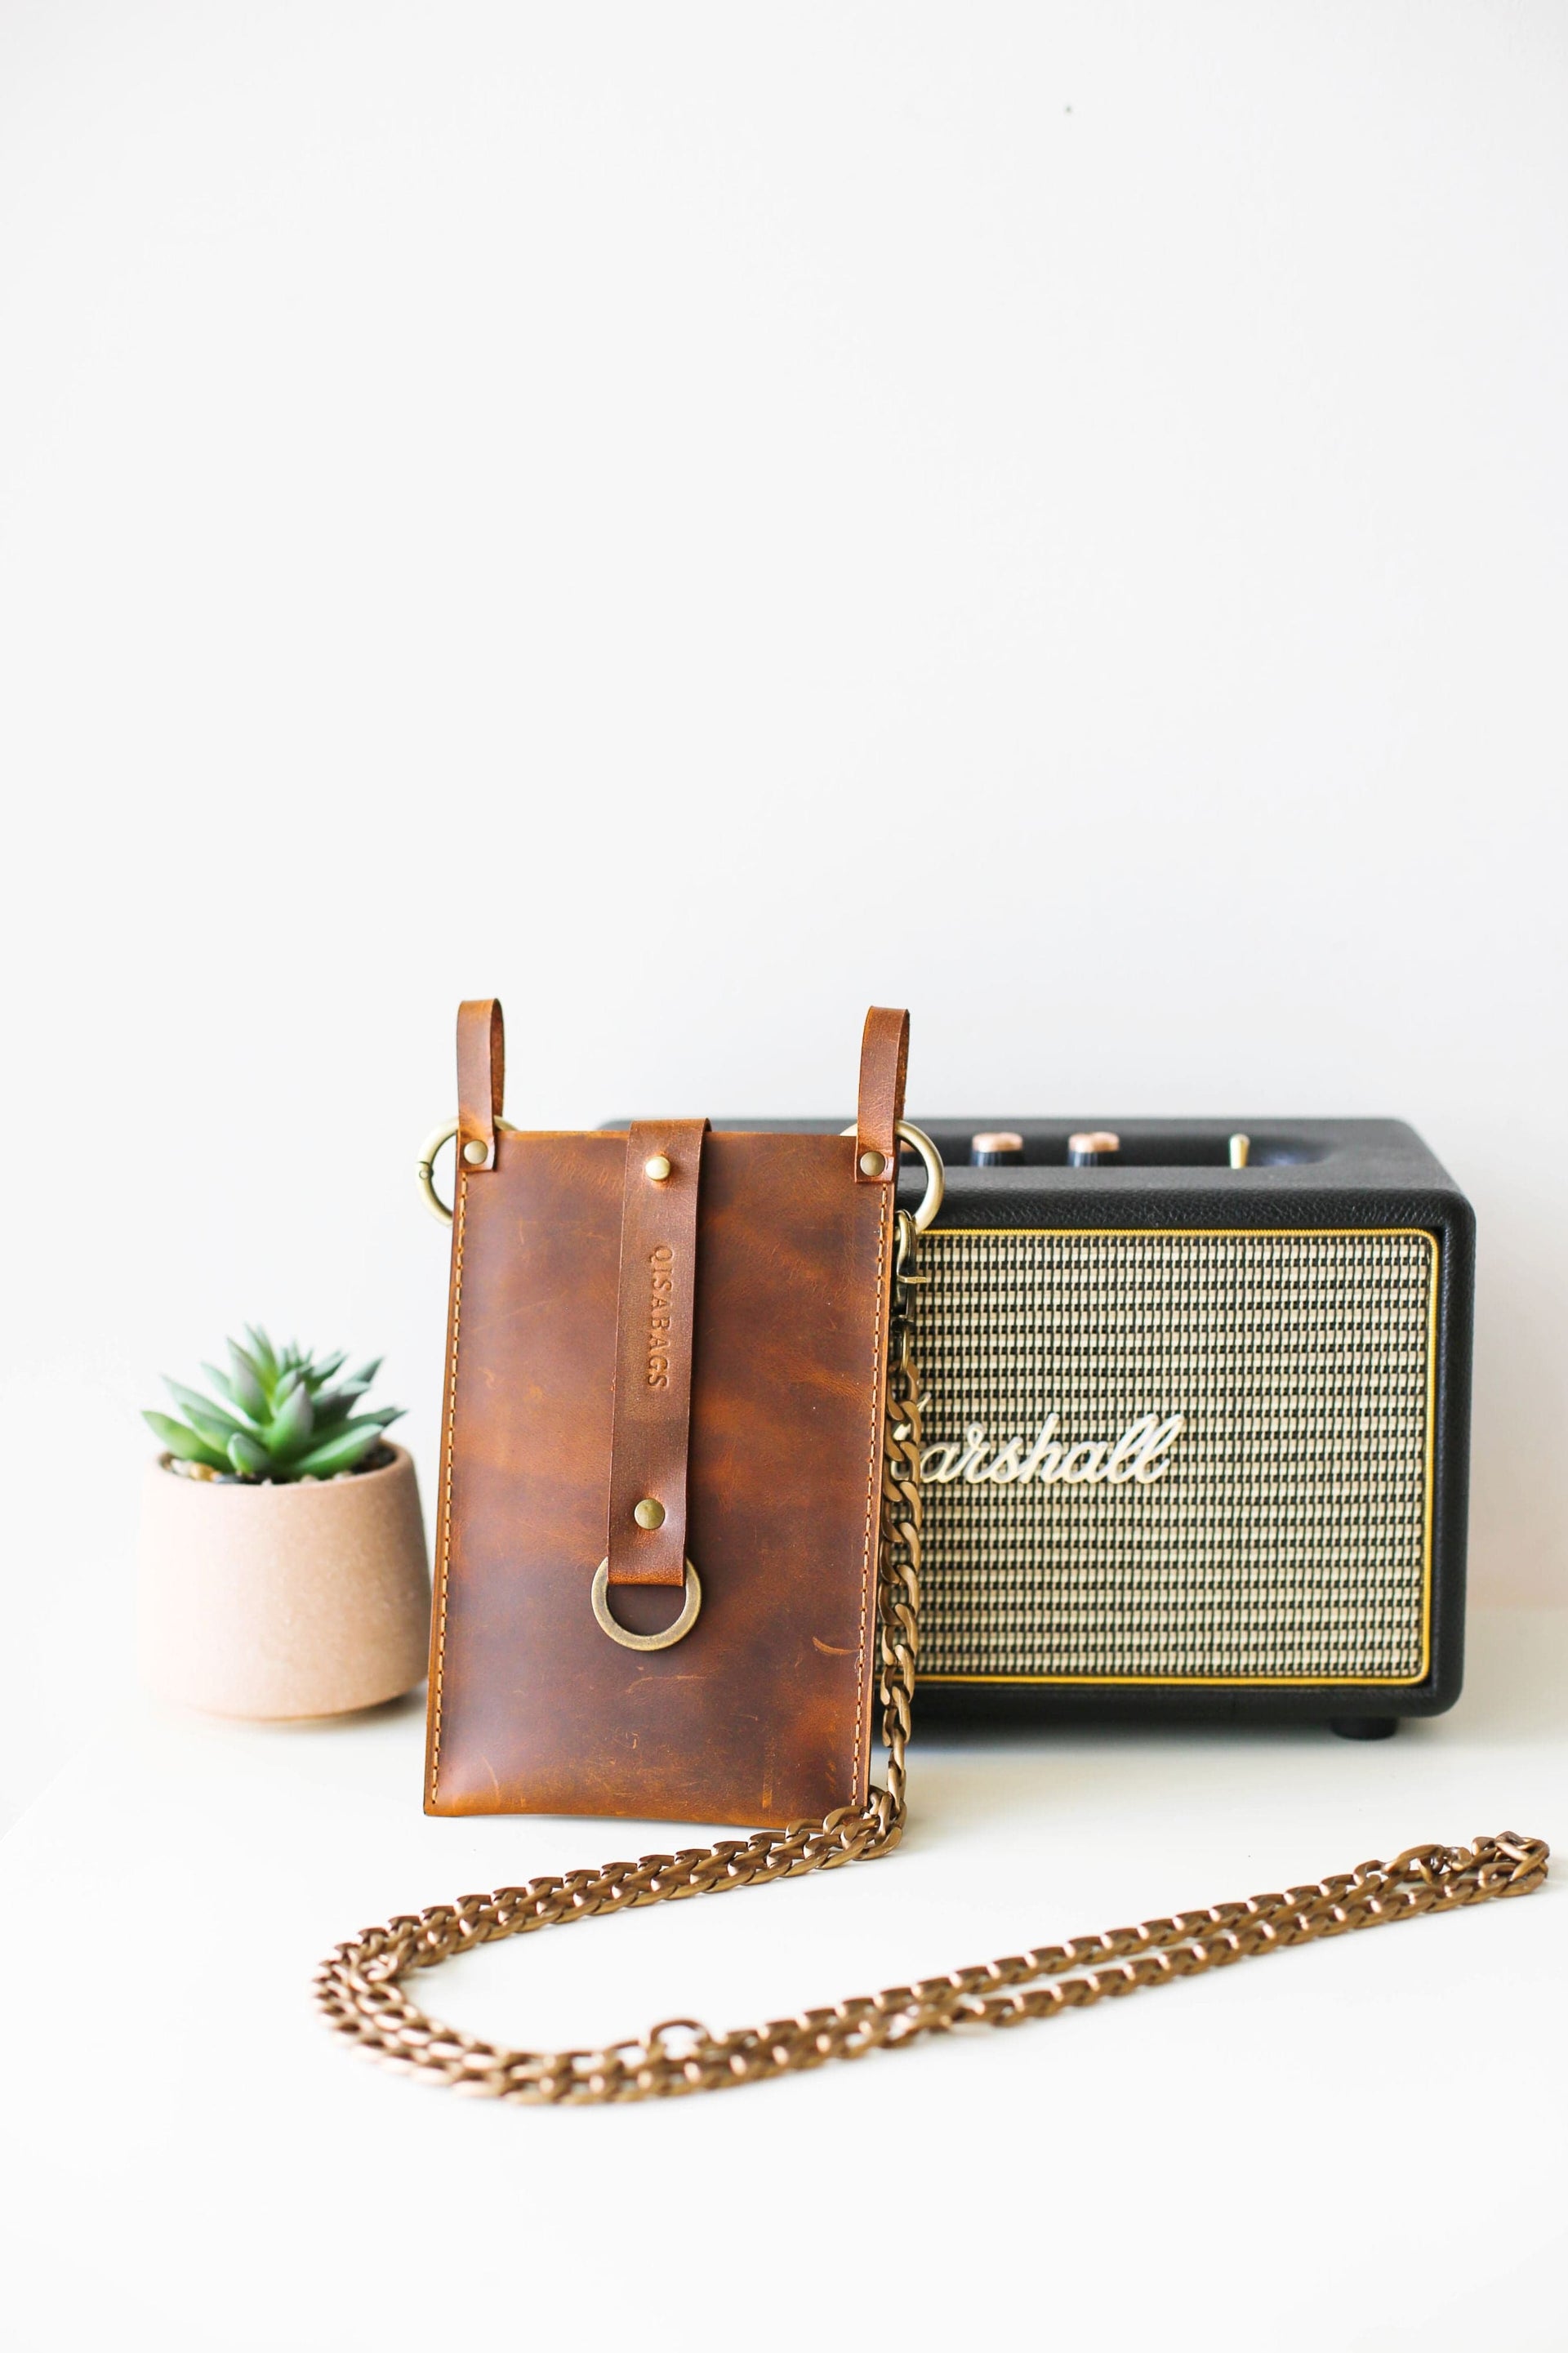 Hipster leather bag for phone